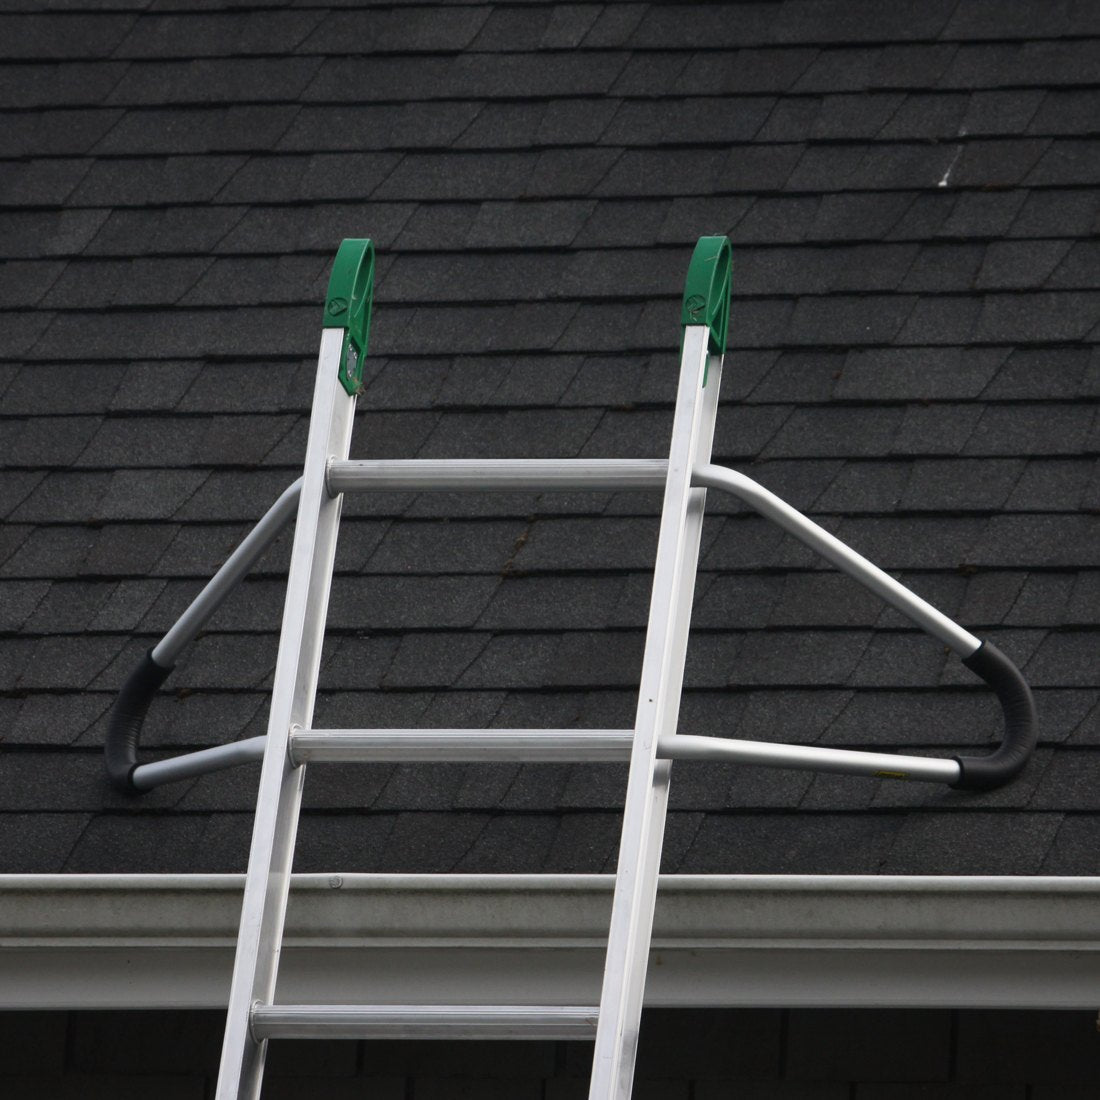 LeveLok Open Rung Standout Brackets Foam Pair In Action On Roof View